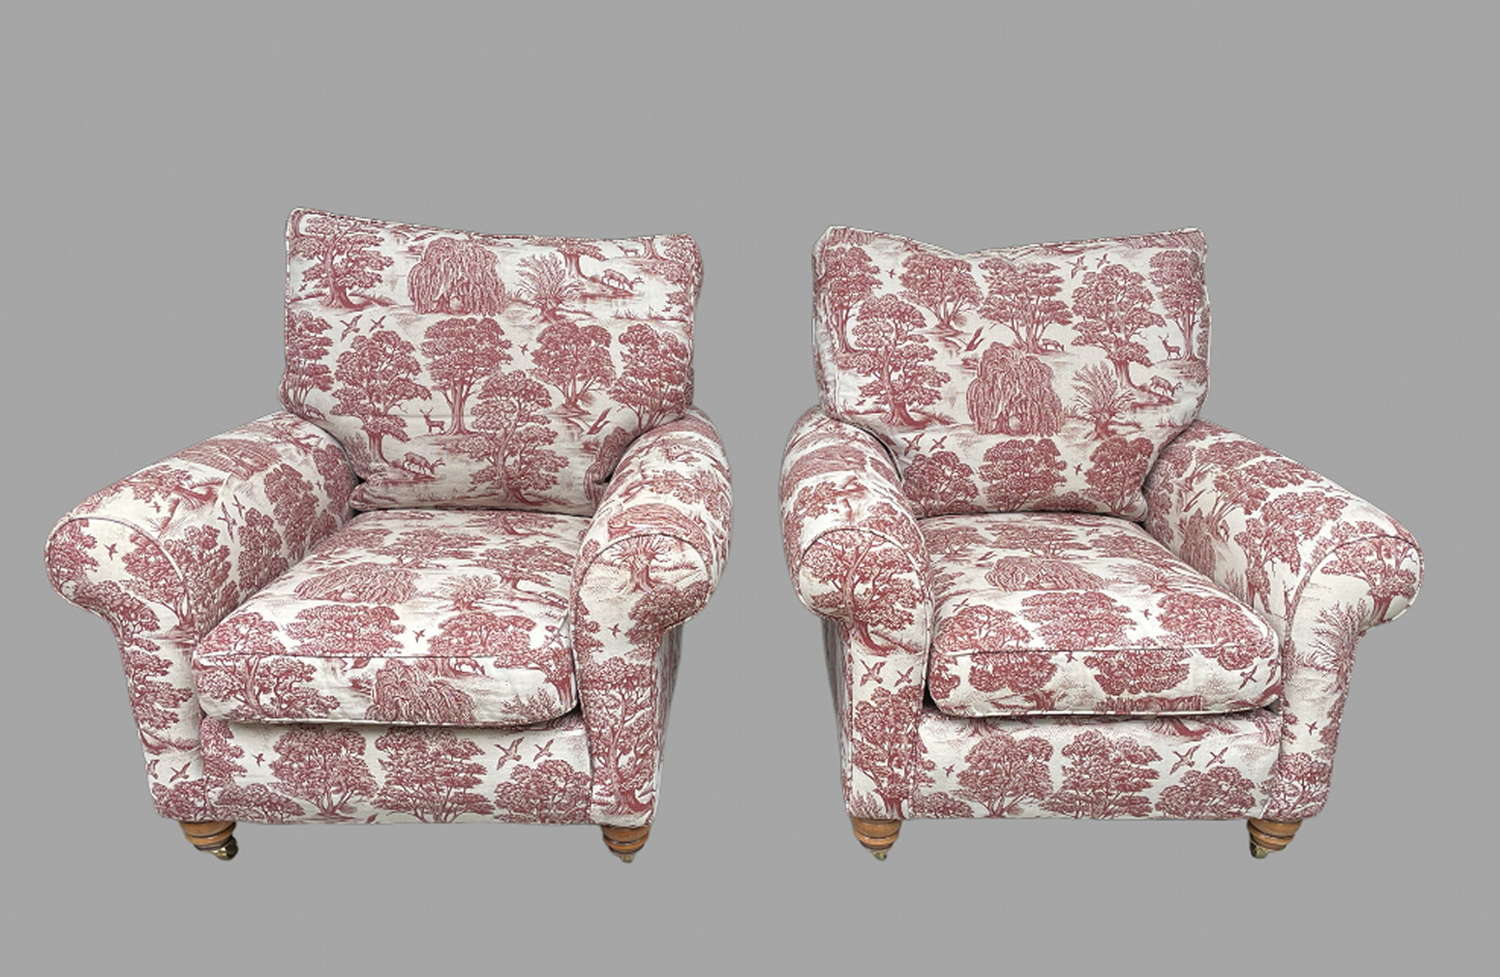 A Fabulous Pair of Lewis and Wood Material Armchairs